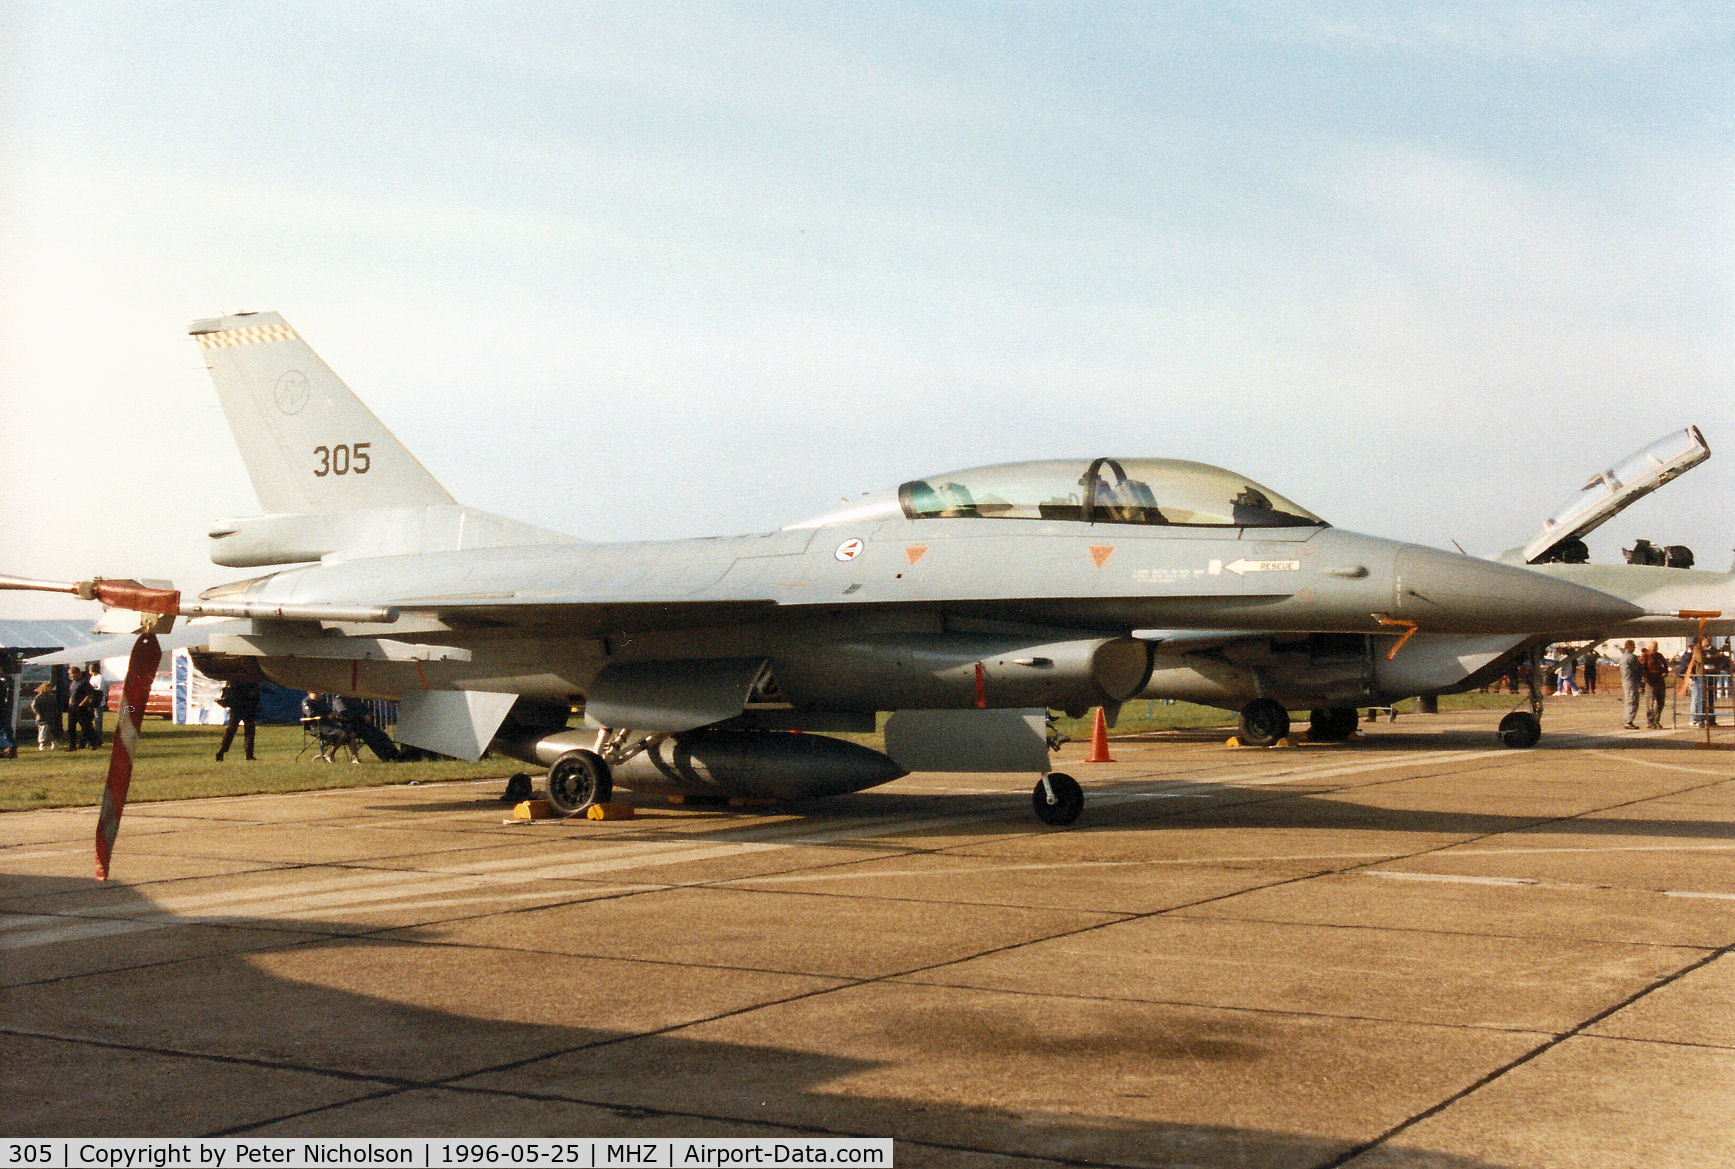 305, General Dynamics F-16BM Fighting Falcon C/N 6L-5, F-16 Falcon of 332 Skv Royal Norwegian Air Force before Mid-Life Update on display at the 1996 RAF Mildenhall Air Fete.